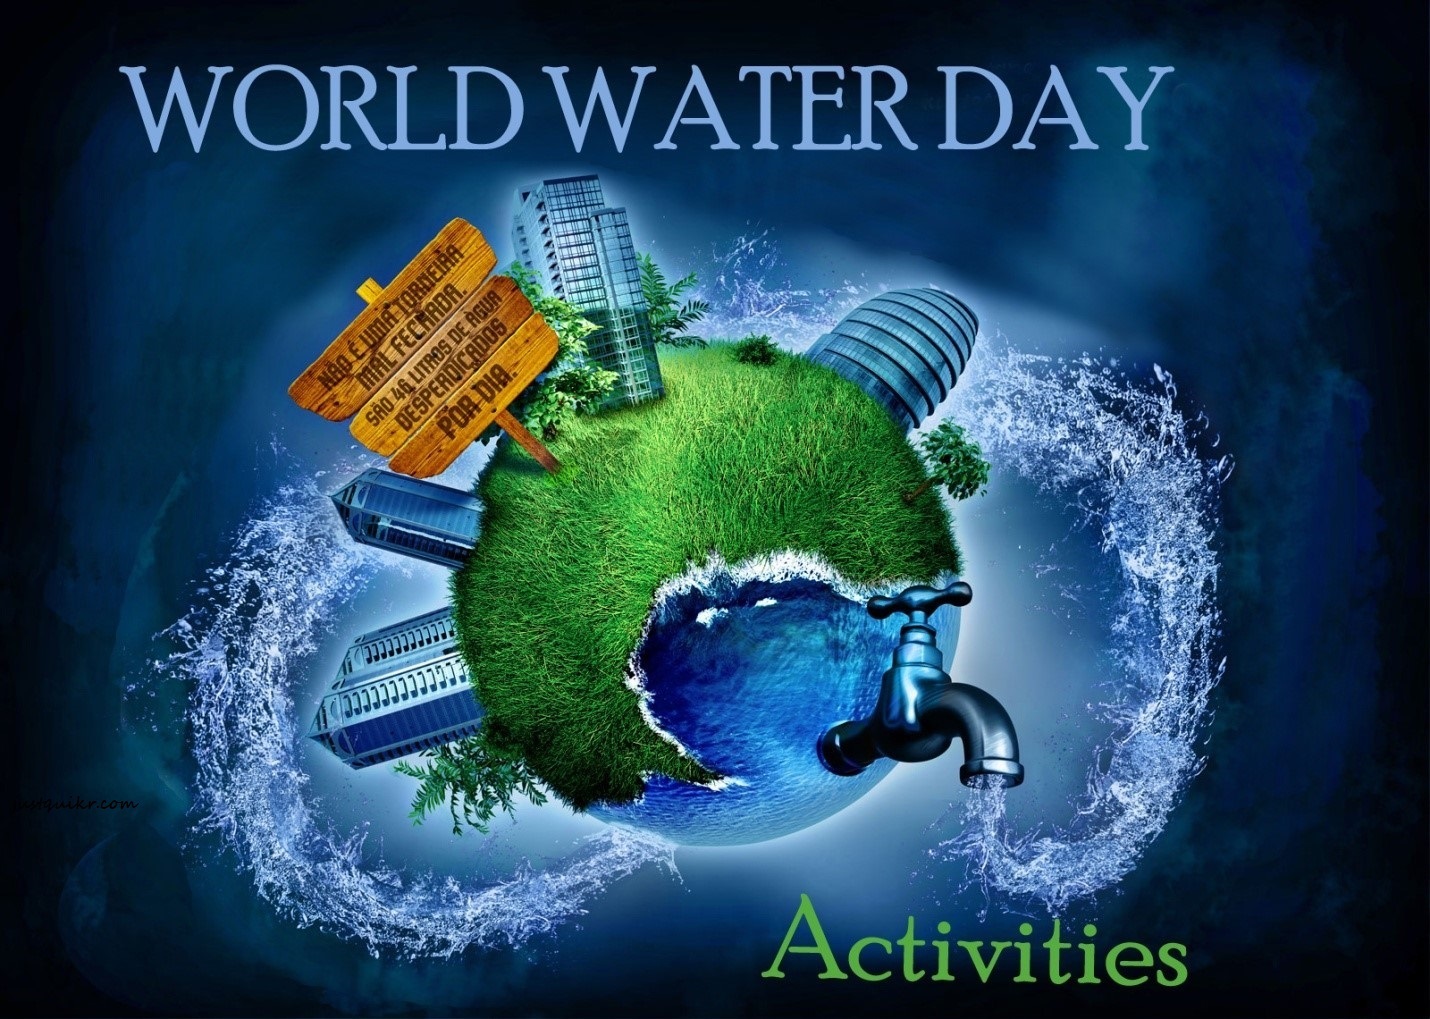 World Water Day Celebration and Activities | Just Quikr presents ...